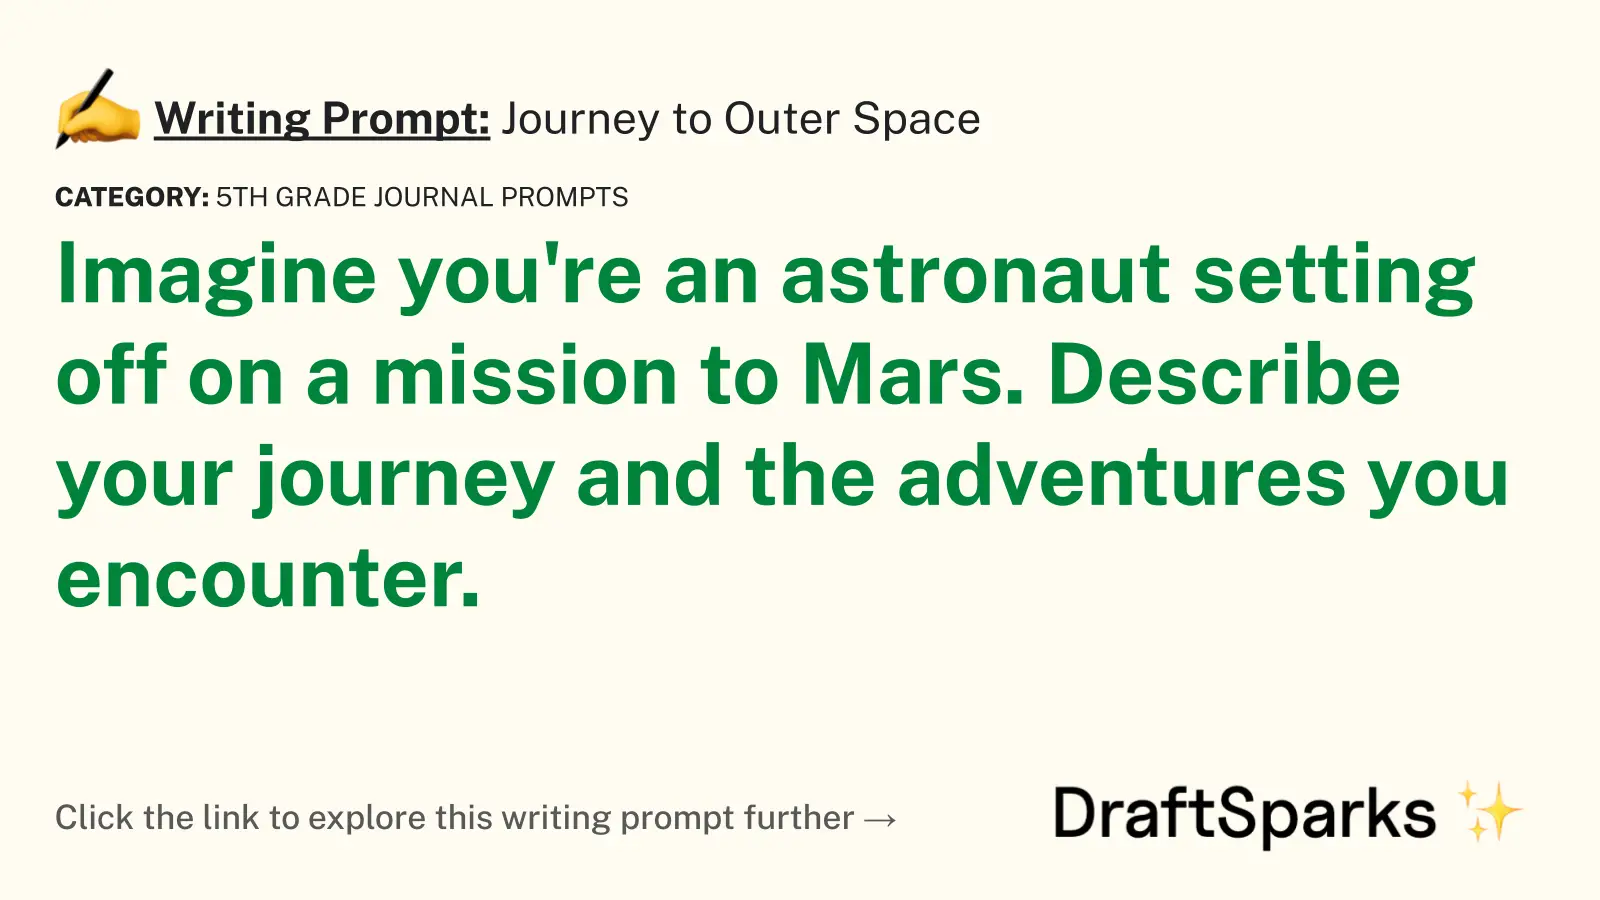 Journey to Outer Space